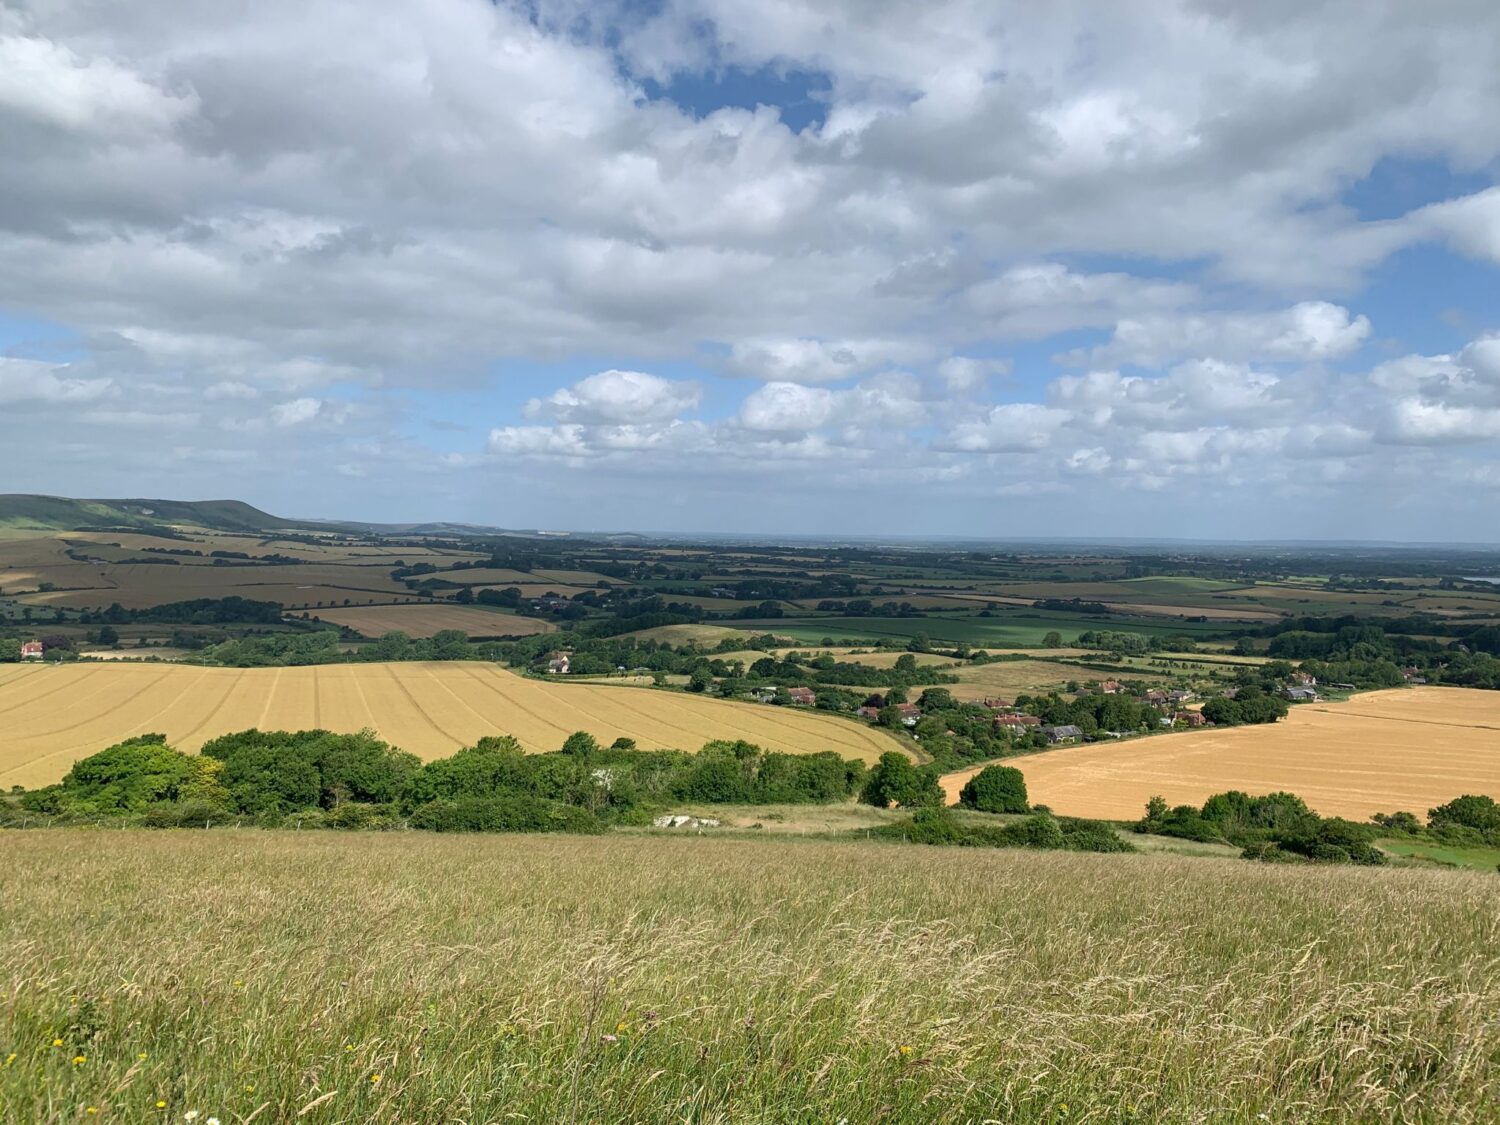 A photo of the South Downs, where DofE Students were hiking